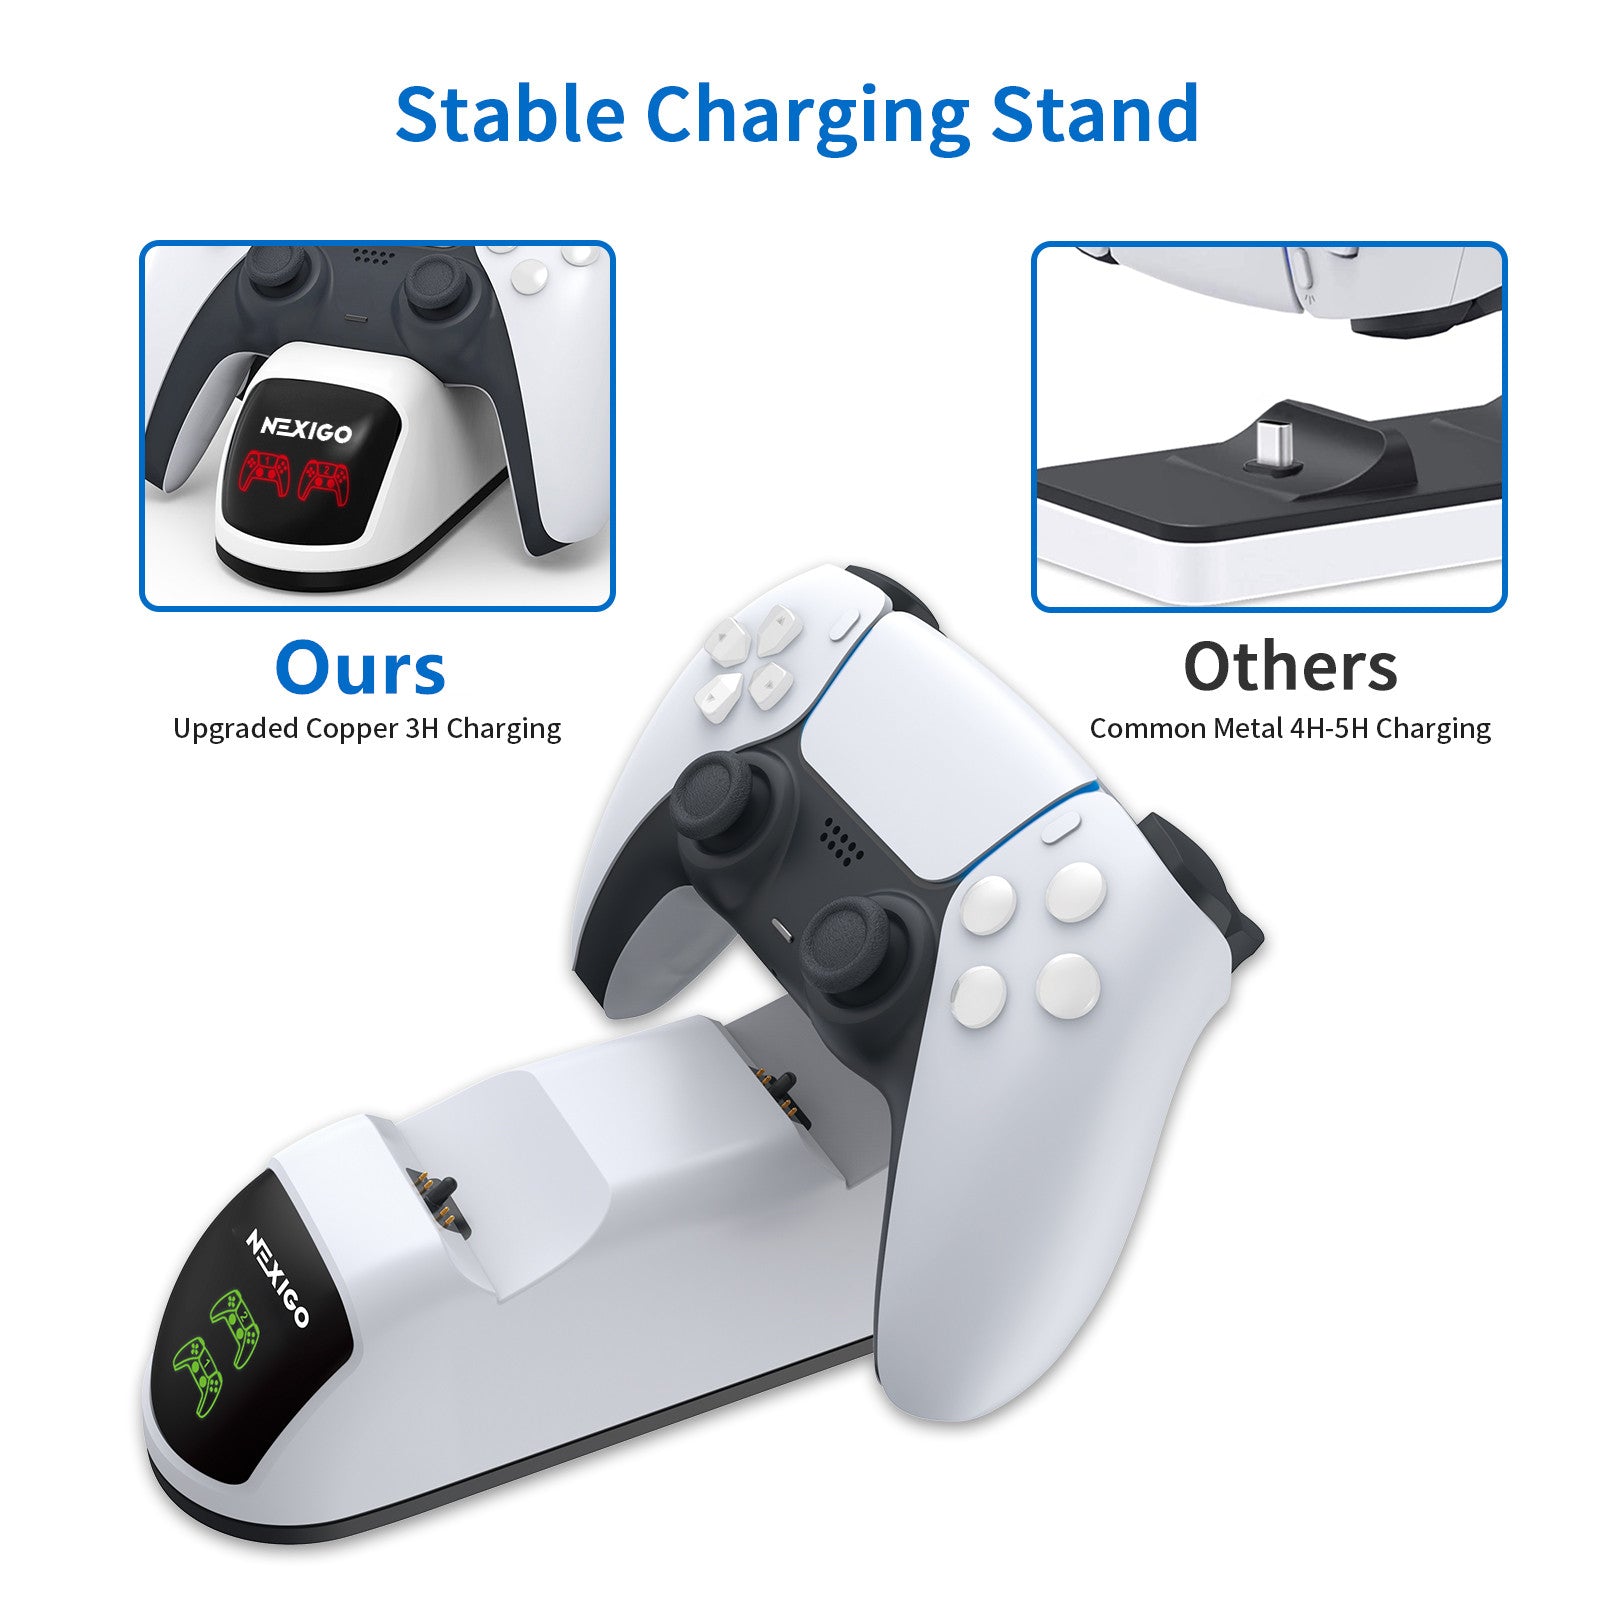 This charging station is upgraded Copper 3H Charging, Faster than Common Metal 4-5H Charging